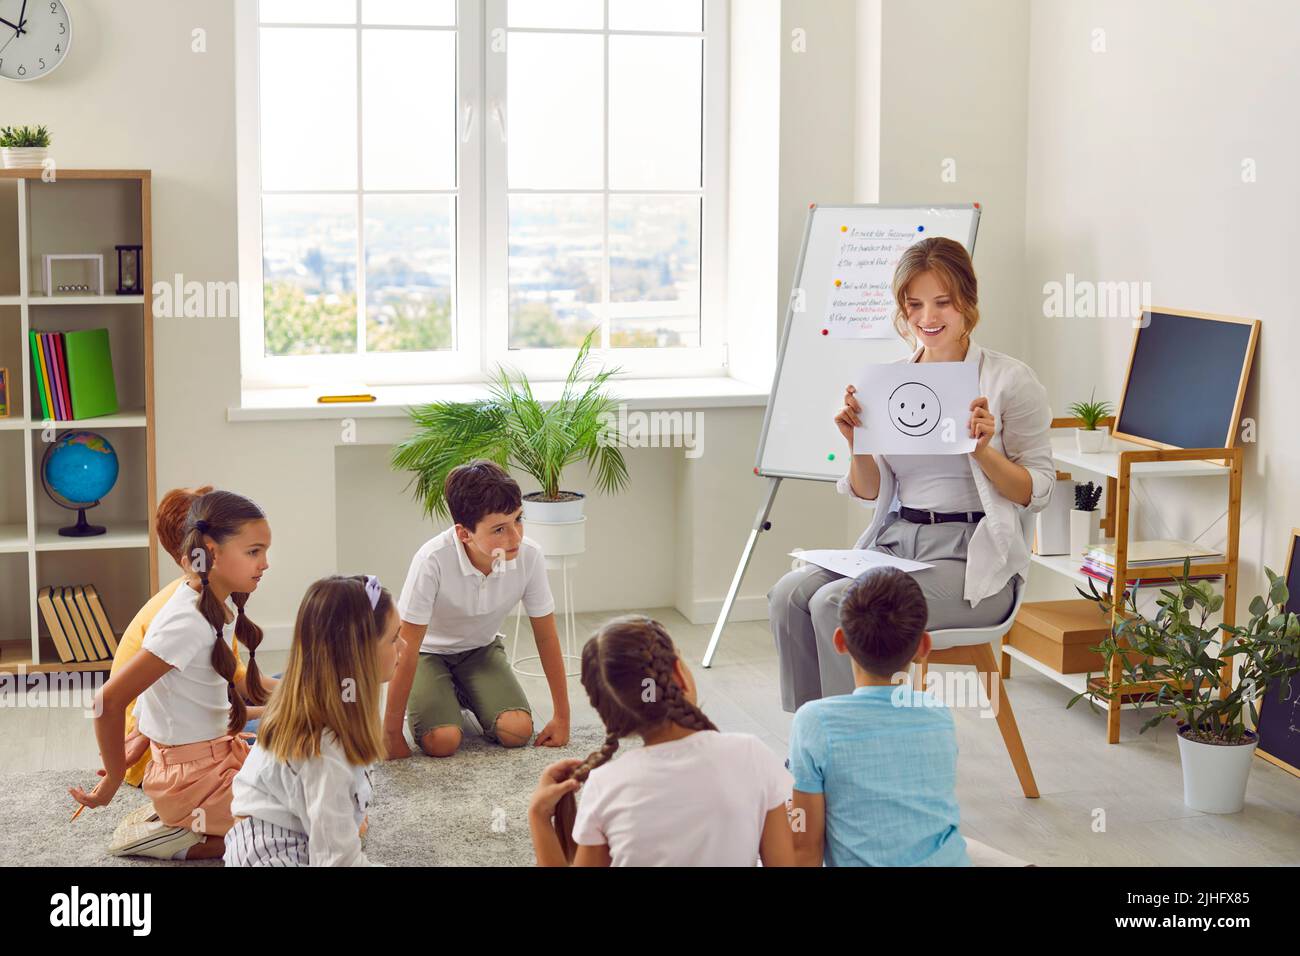 School psychologist talks about emotions during meeting with group of elementary school students. Stock Photo